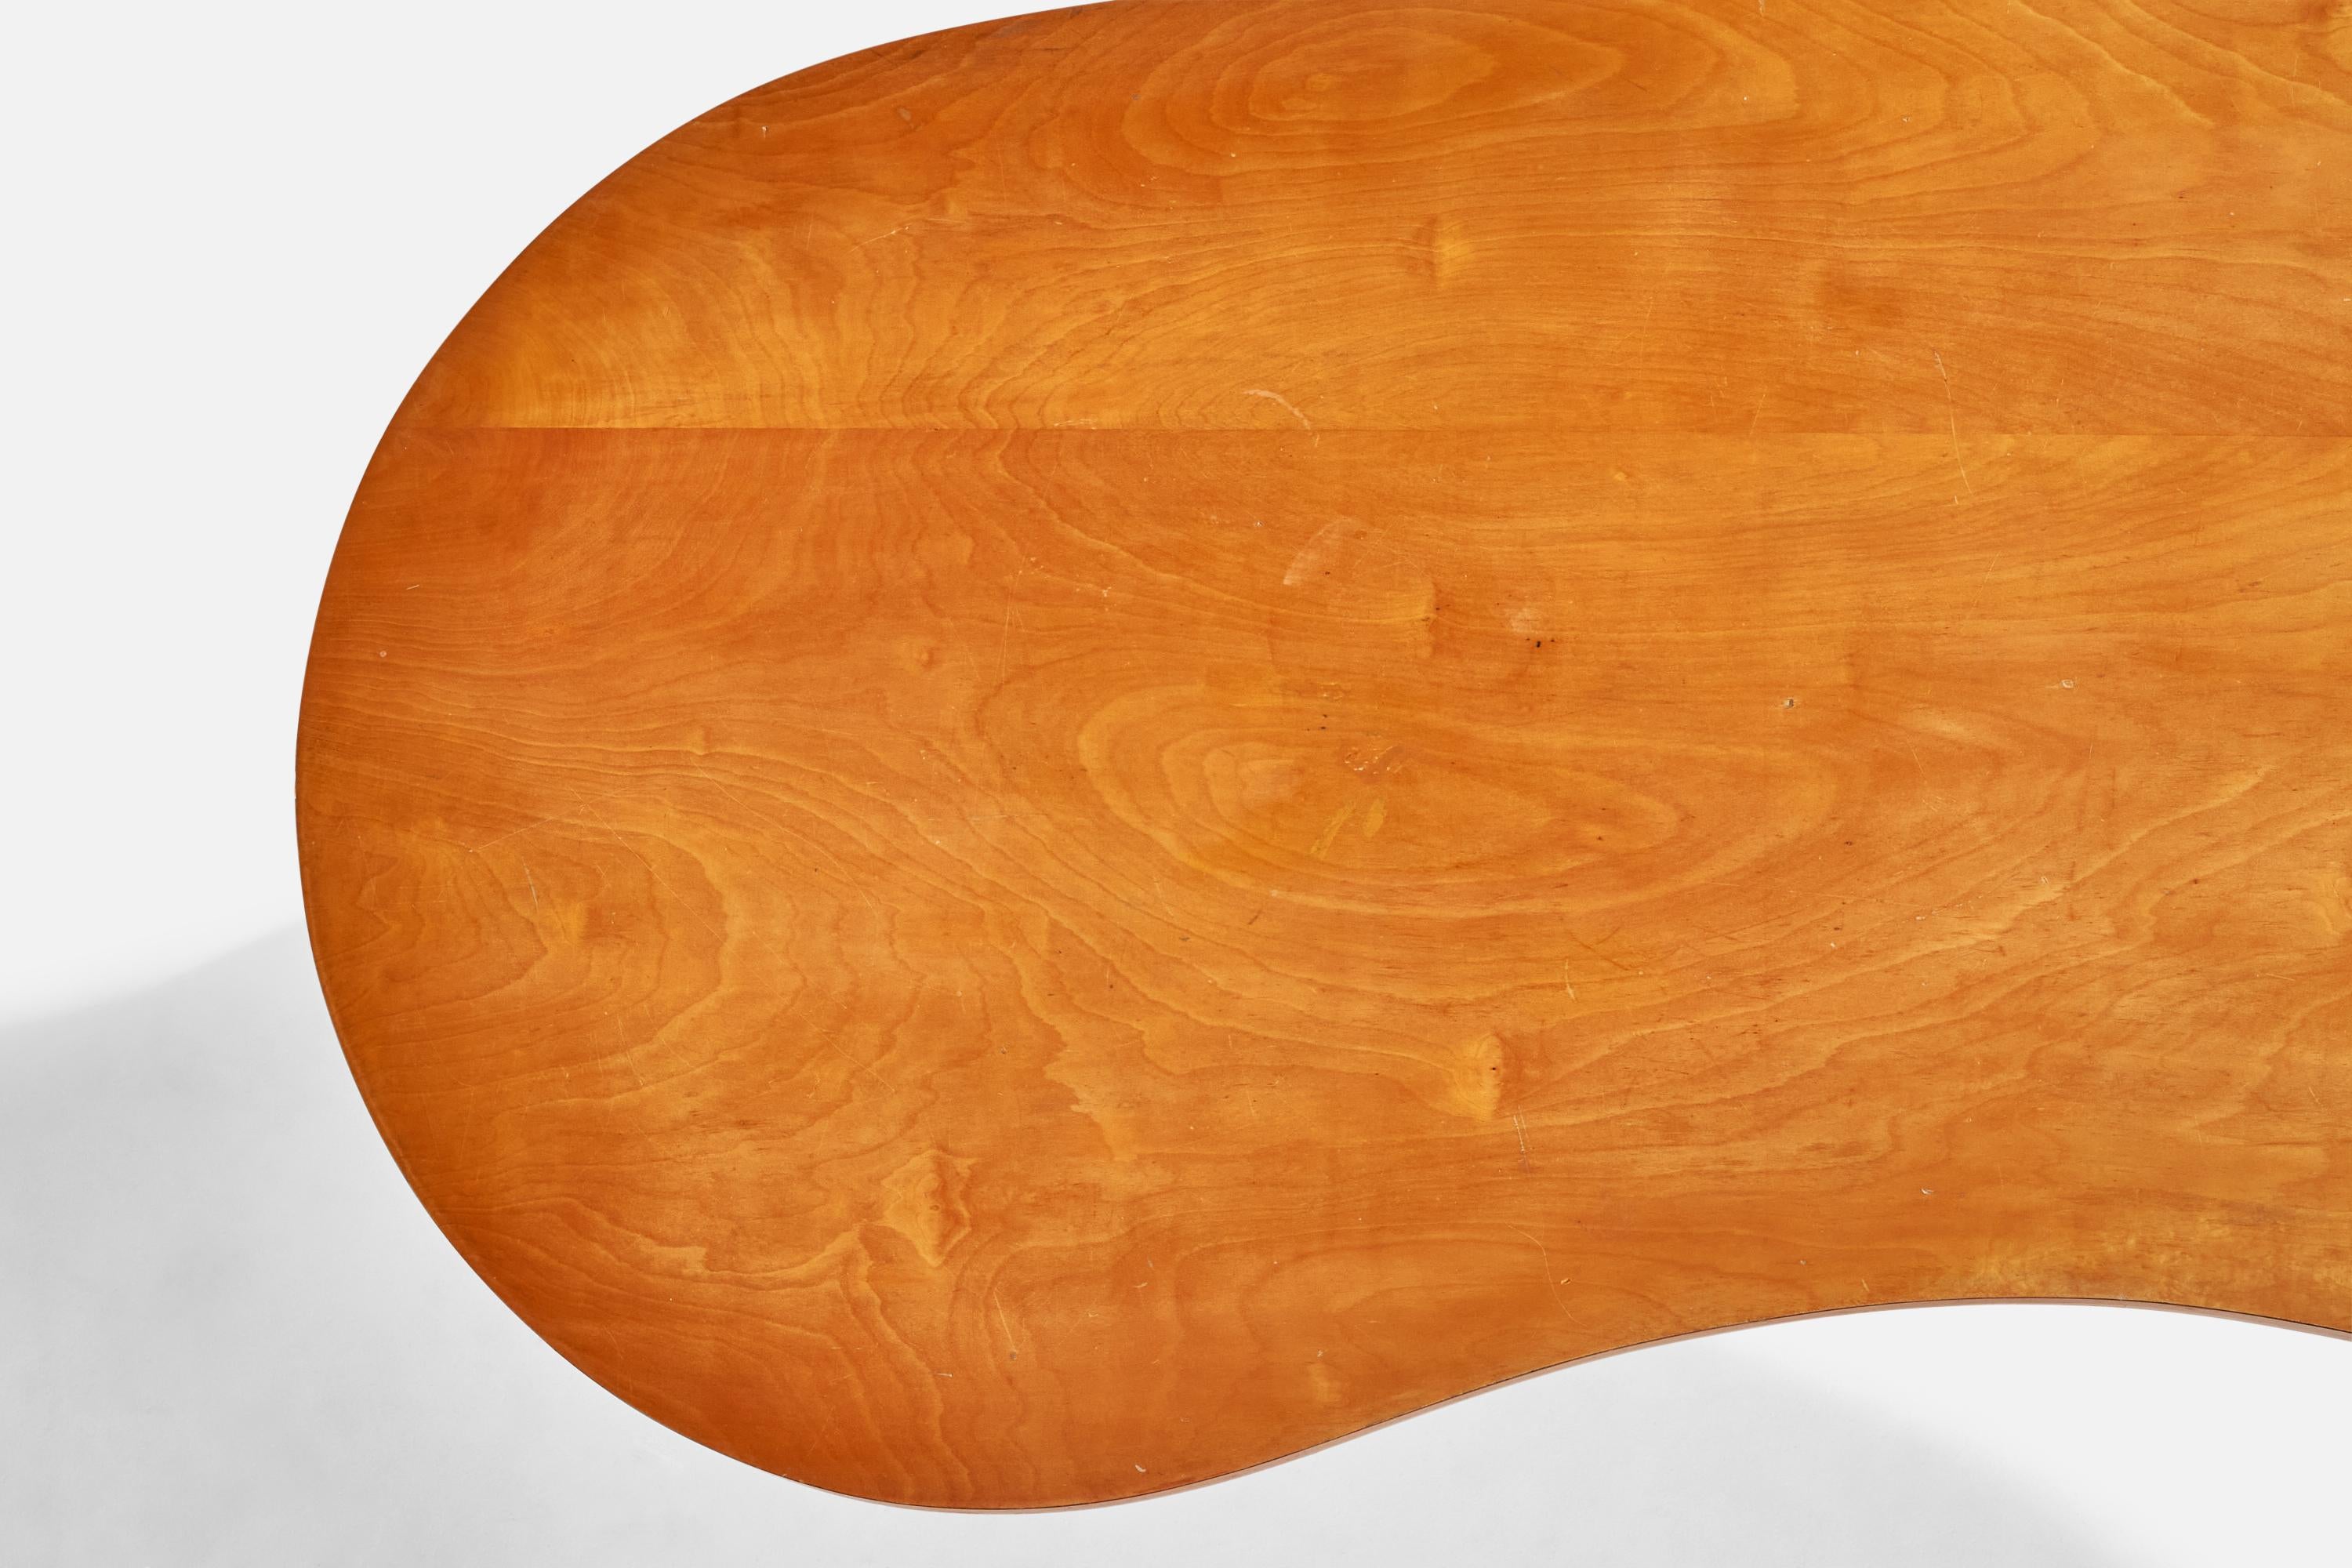 Edmond Spence, Organic Table, Birch, Sweden, 1950s In Good Condition For Sale In High Point, NC